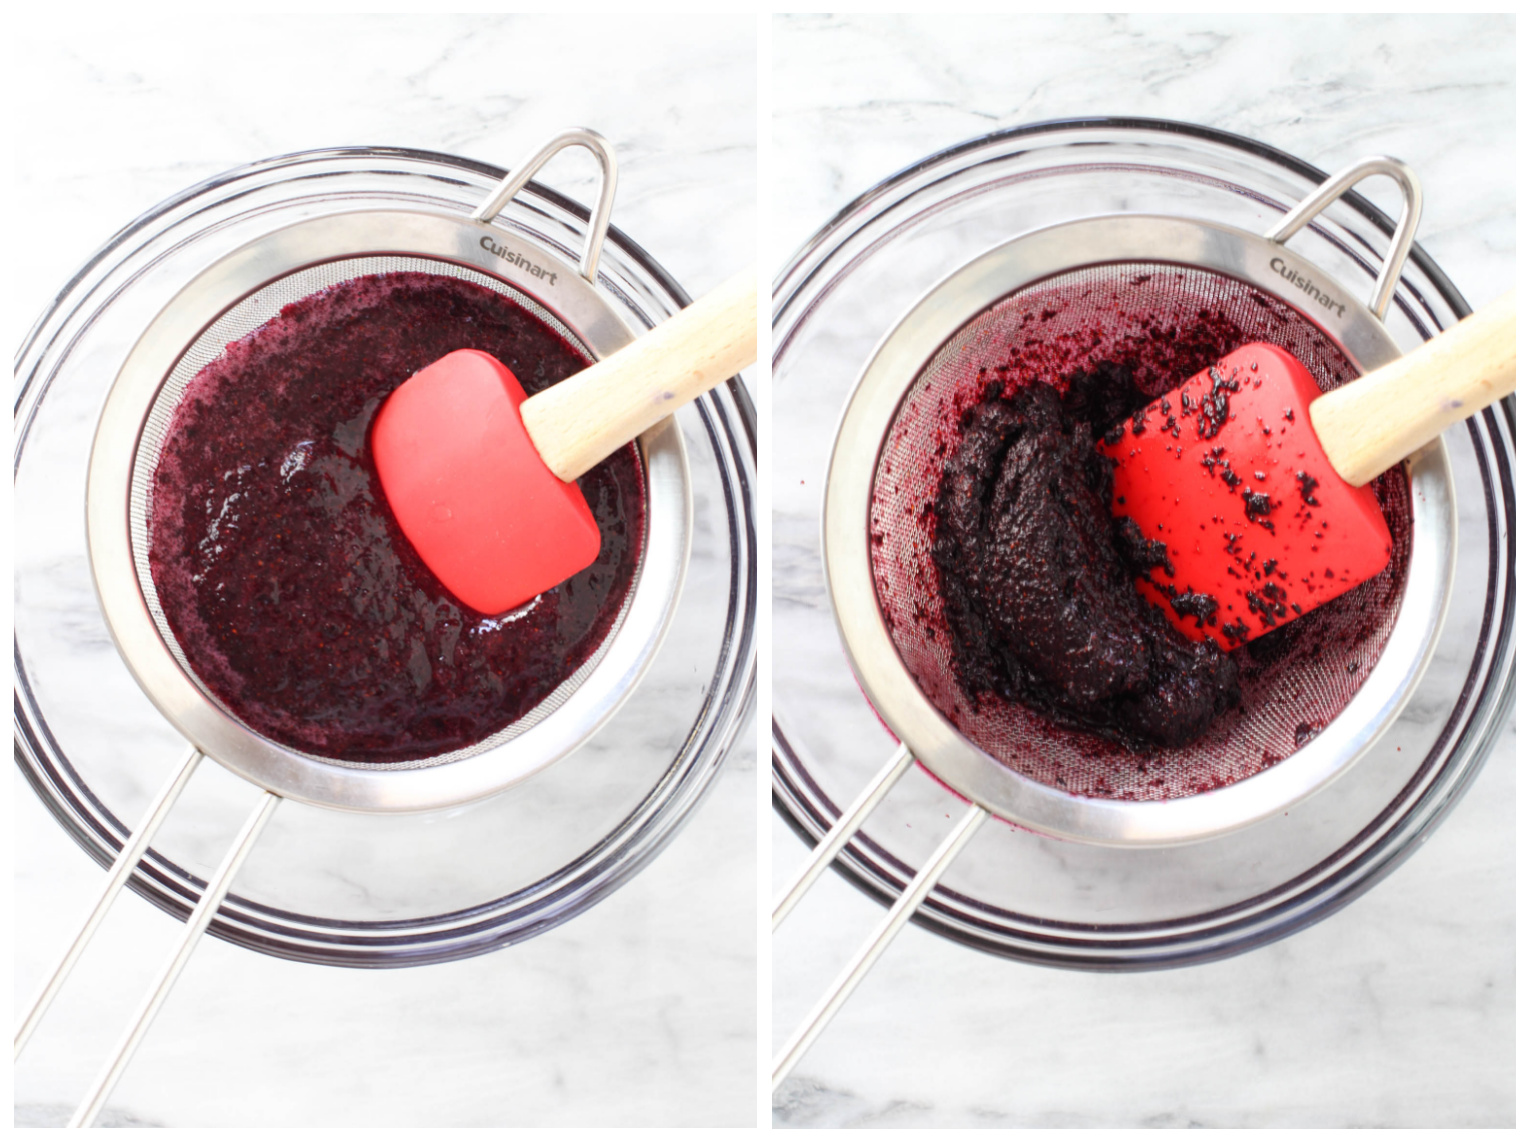 Two images side by side. On the left, blueberry puree being puched through a sieve with a rubber spatula. On the right, blueberry pulp in a sieve with a rubber spatula.